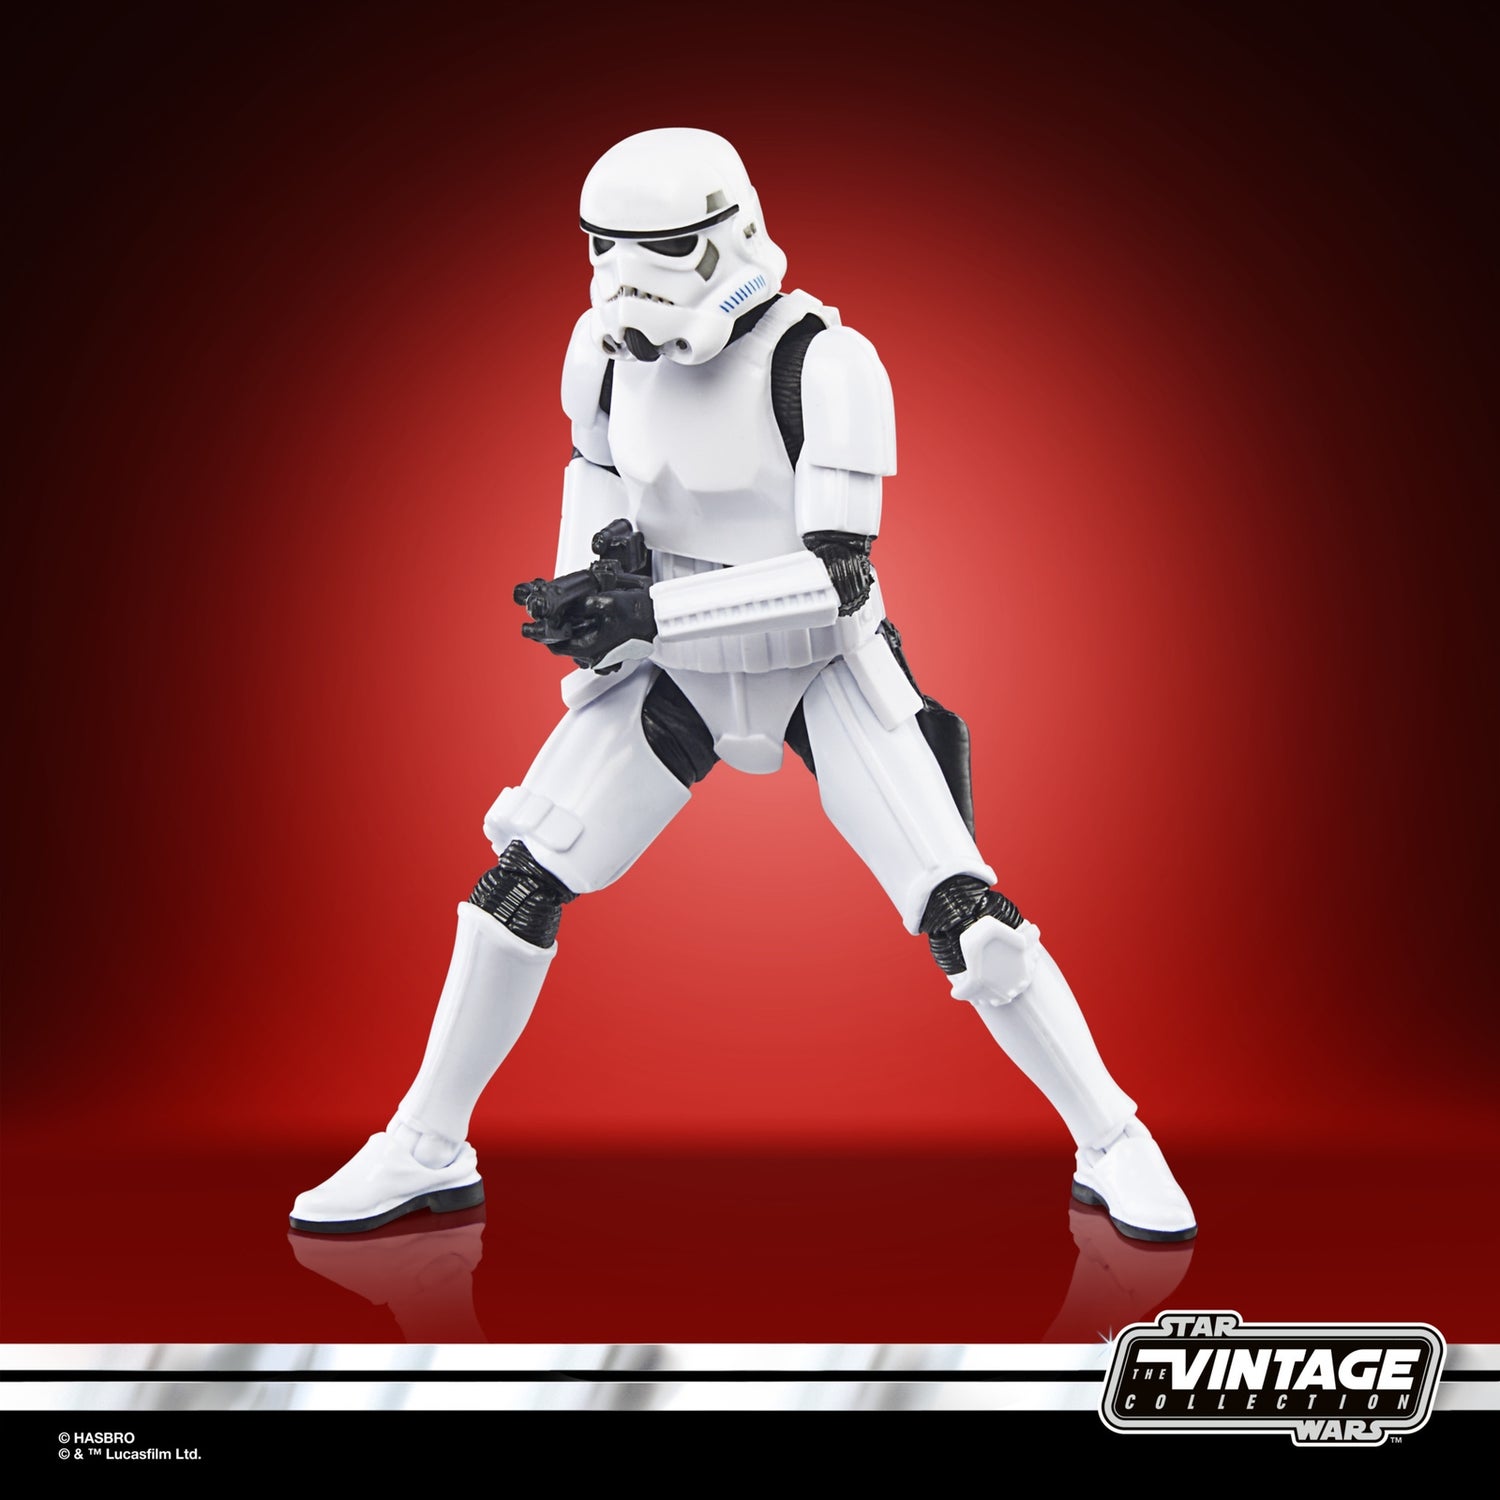 Hasbro Star Wars The Vintage Collection Stormtrooper, Star Wars: A New Hope Action Figure (3.75”)